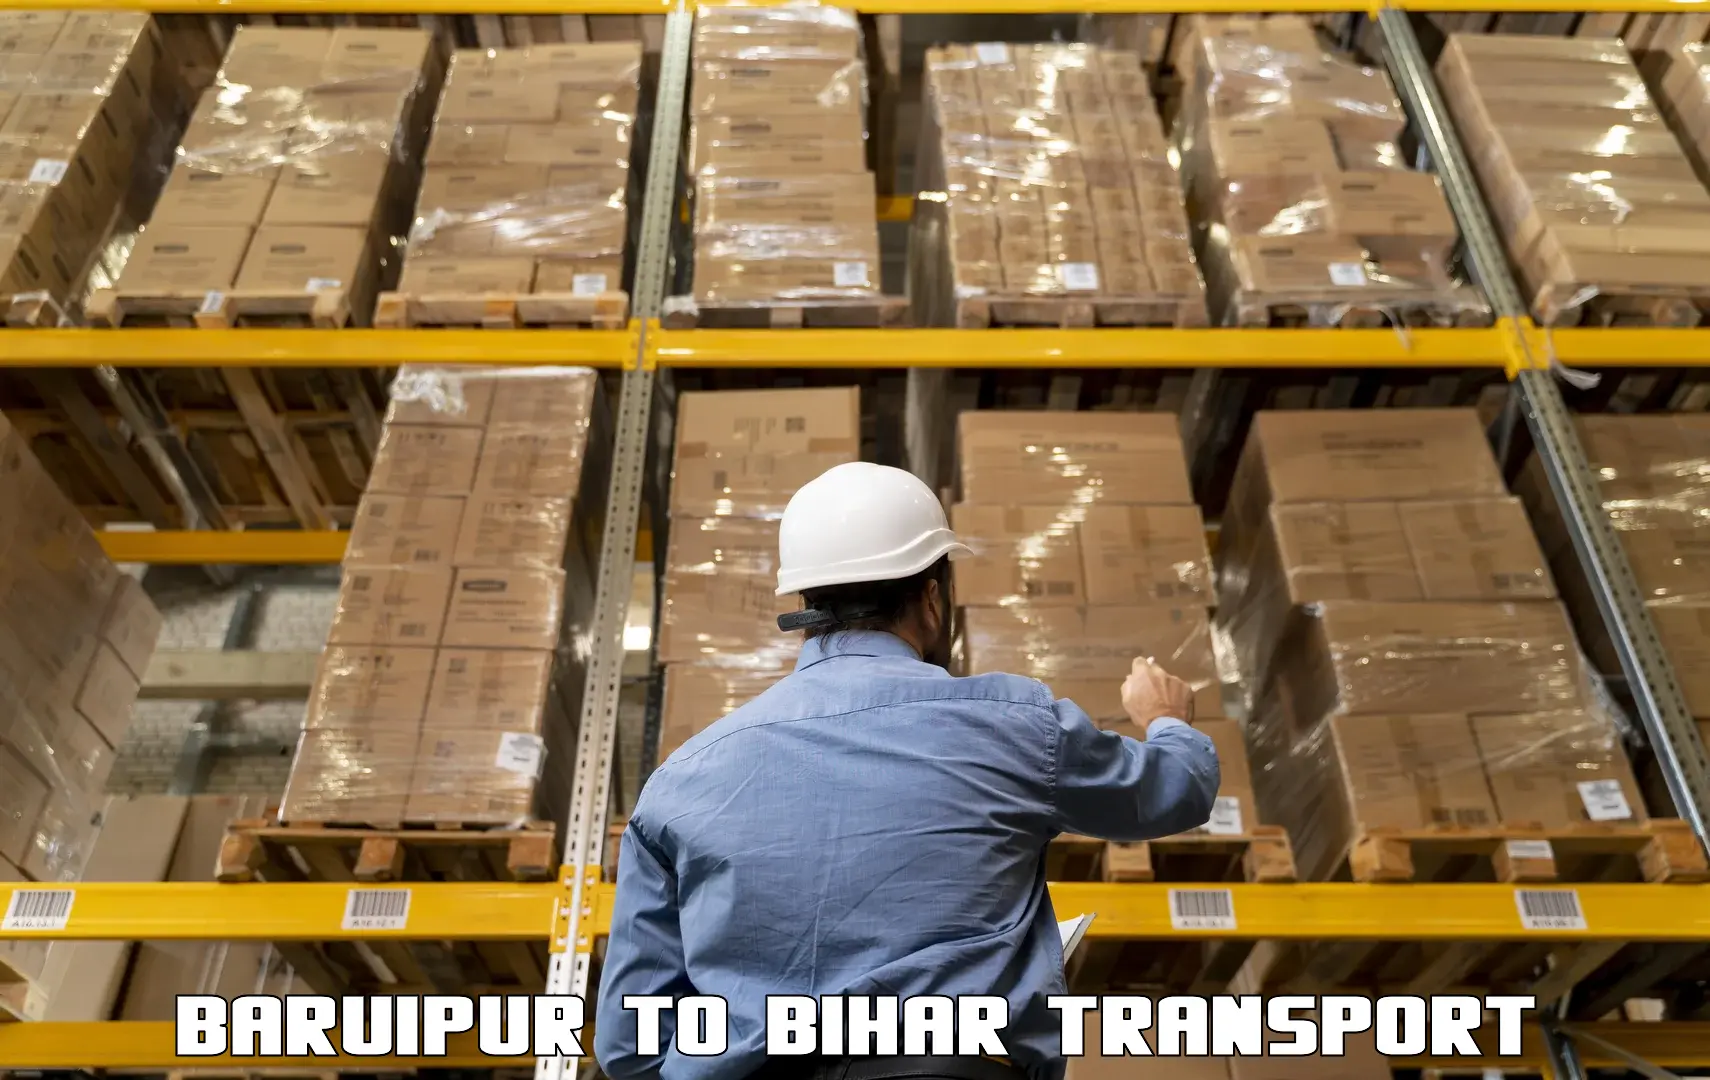 Road transport online services Baruipur to Mohania